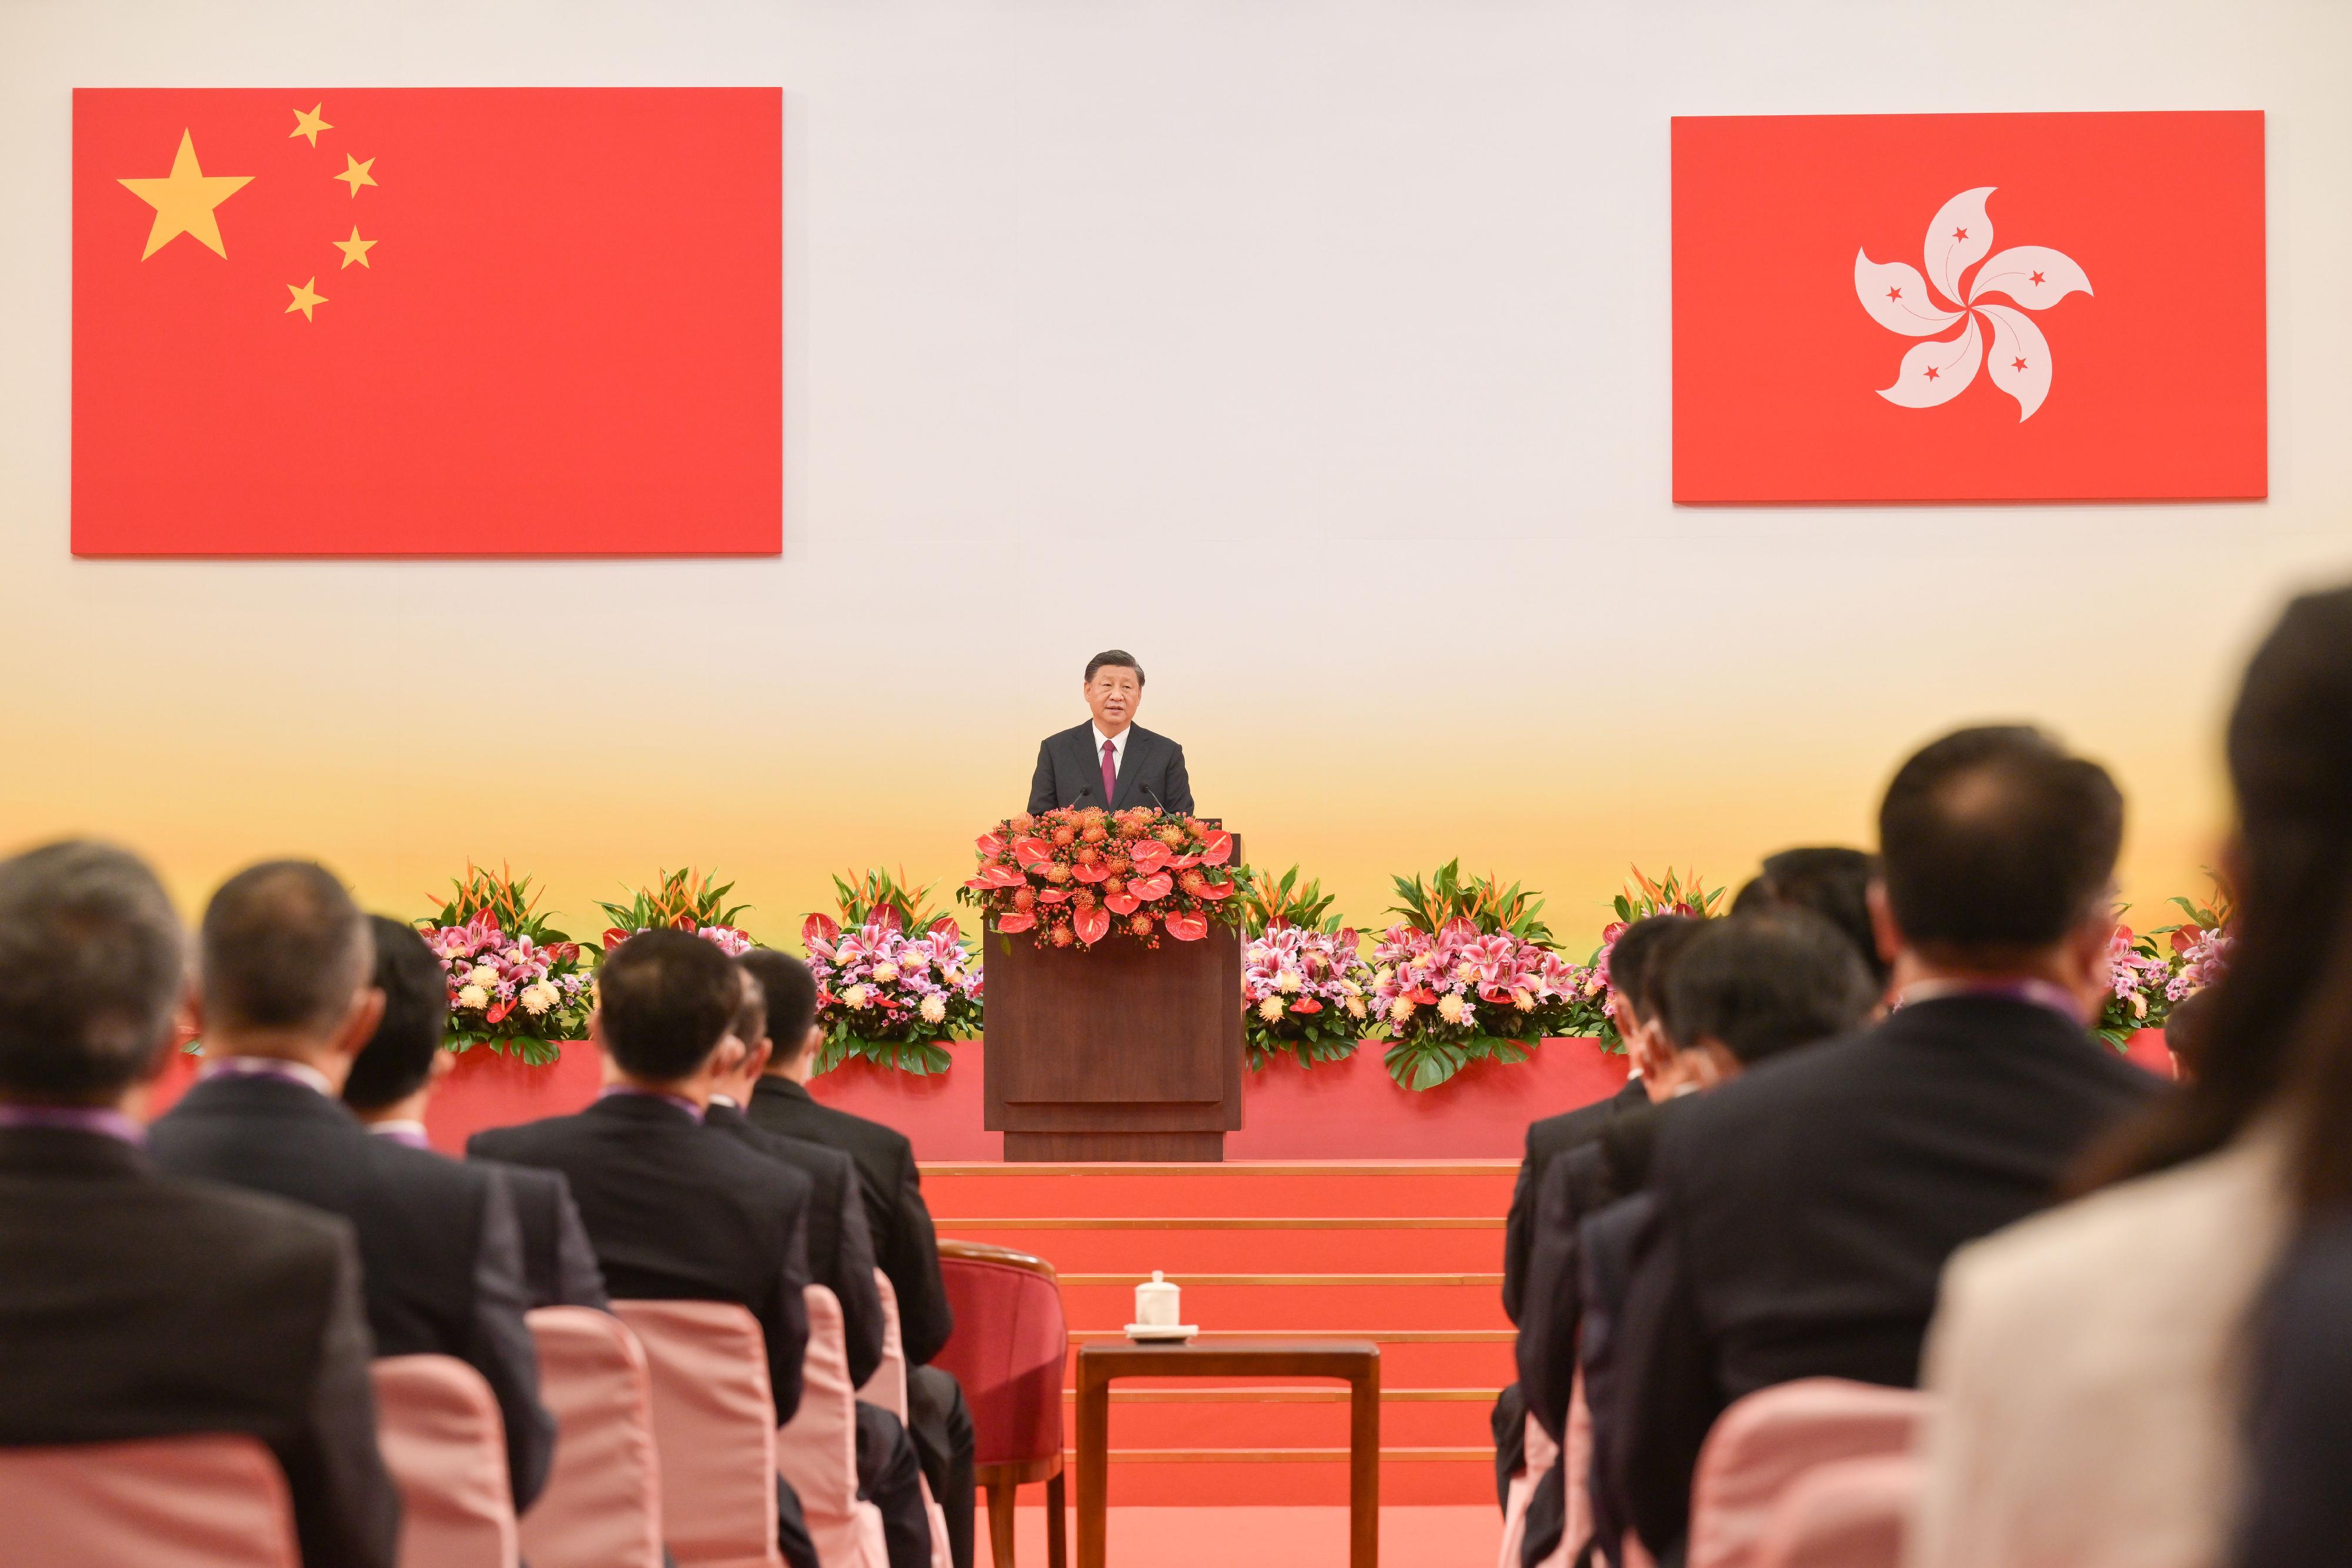 President Xi Jinping speaks at the Inaugural Ceremony of the Sixth-term Government of the Hong Kong Special Administrative Region at the Hong Kong Convention and Exhibition Centre this morning (July 1).
